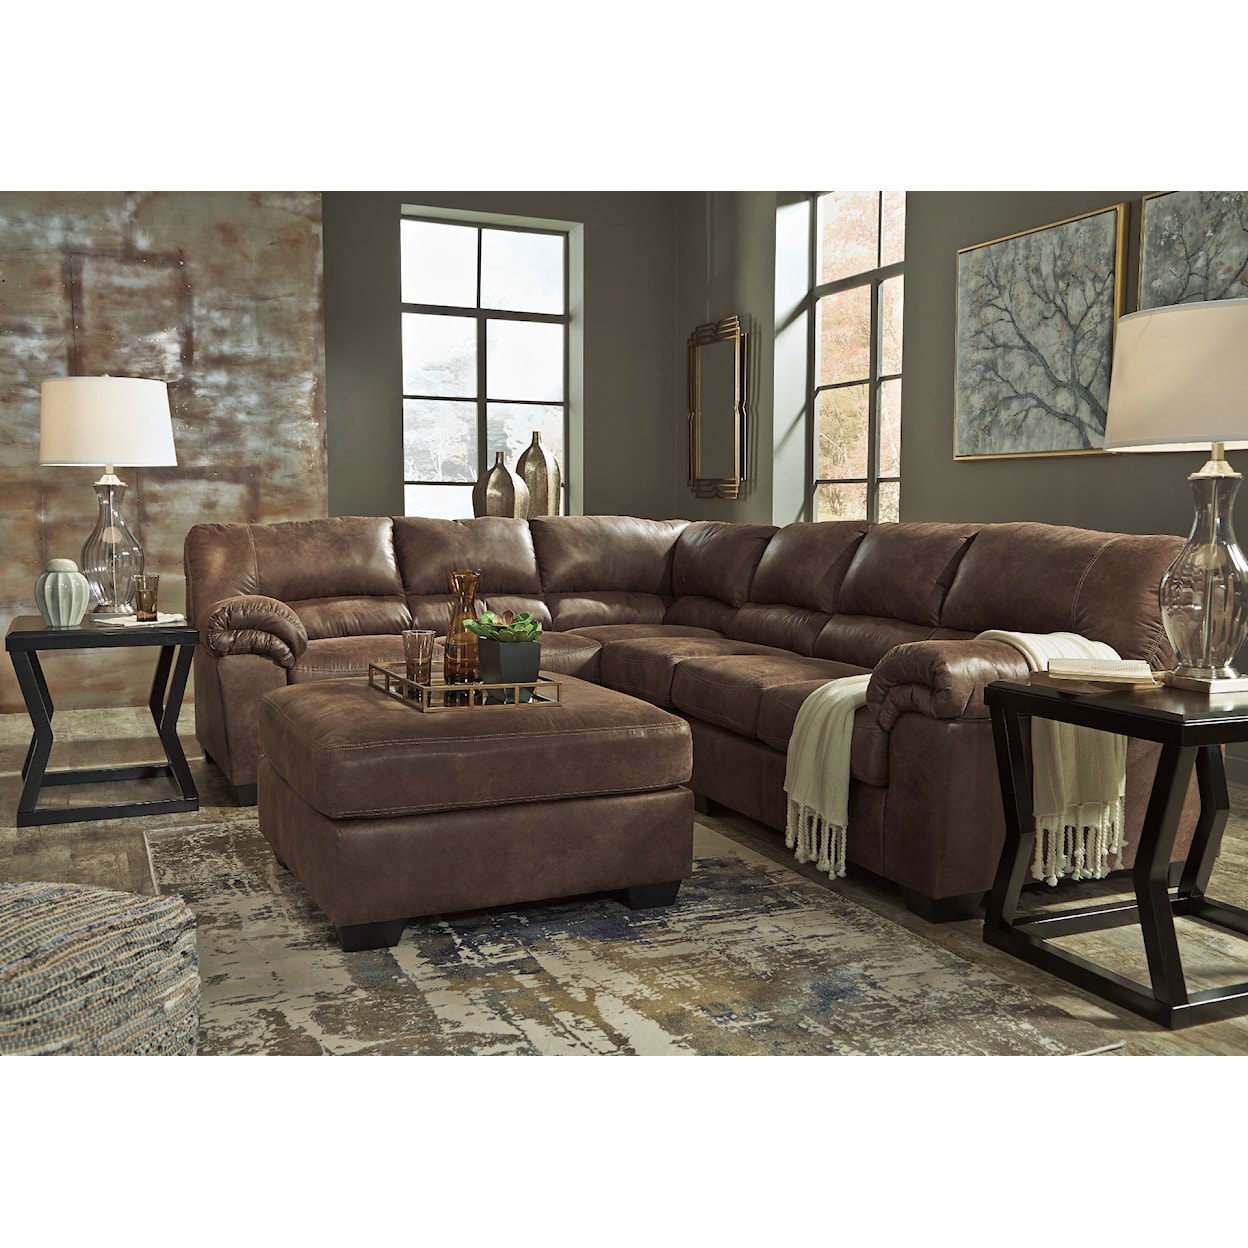 Signature Design by Ashley Furniture Bladen 3-Piece Sectional with Ottoman